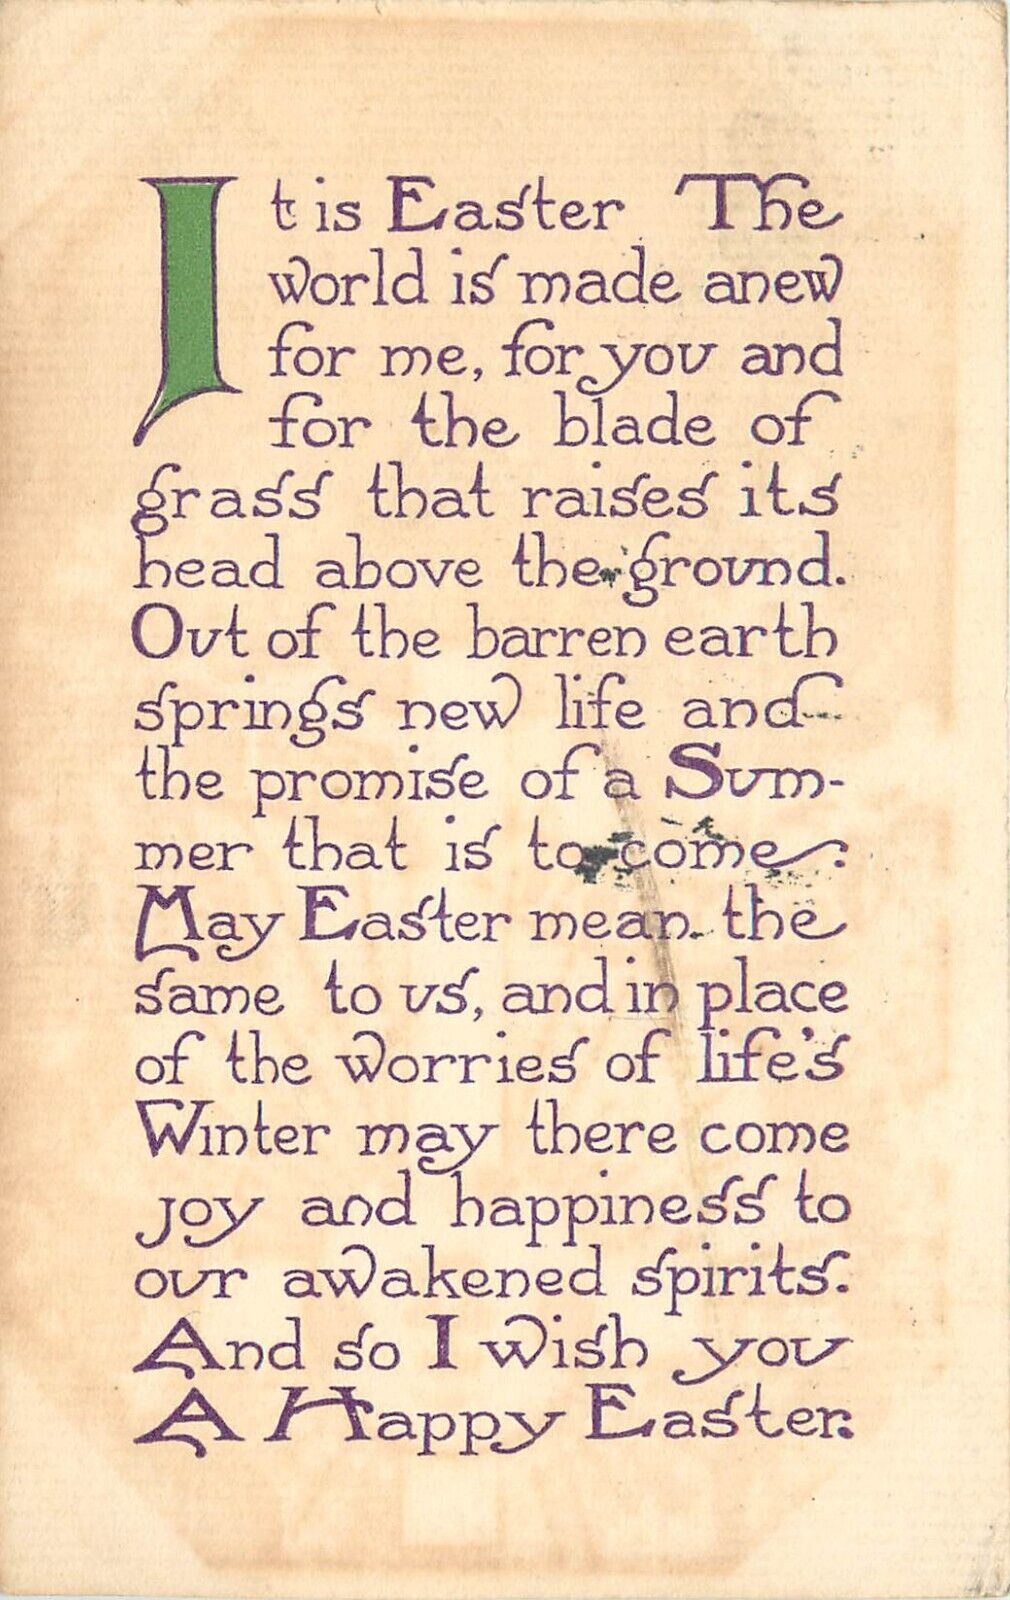 c1909 Rust Craft Postcard; Happy Easter Poem Holiday Greetings, Posted